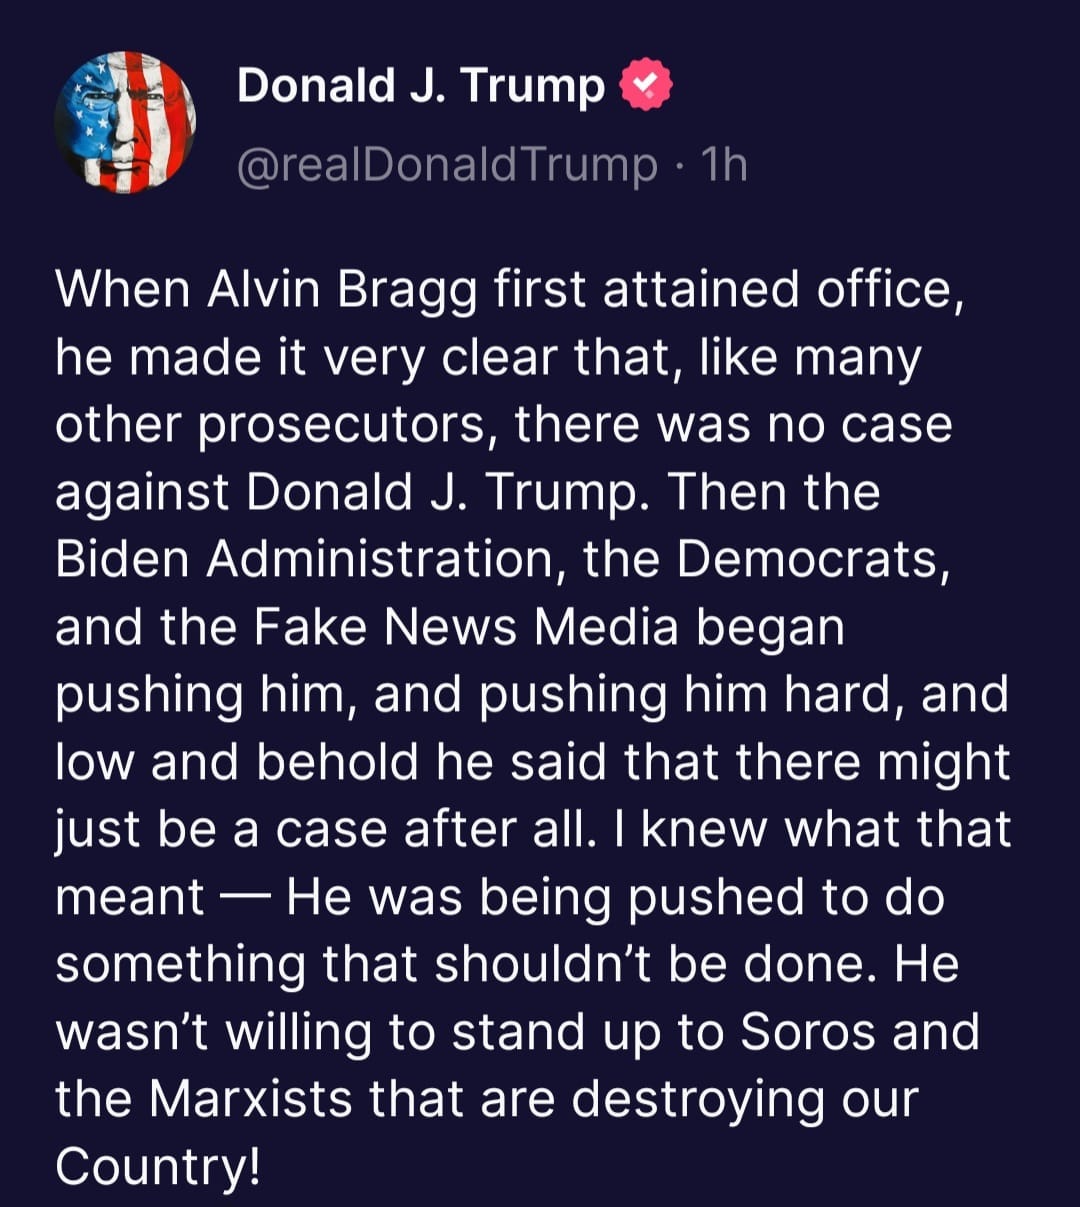 May be an image of text that says 'Donald J. Trump @realDonaldTrump 1h When Alvin Bragg first attained office, he made it very clear that, like many other prosecutors, there was no case against Donald J. Trump. Then the Biden Administration, the Democrats, and the Fake News Media began pushing him, and pushing him hard, and low and behold he said that there might just be a case after all. knew what that meant He was being pushed to do something that shouldn't be done. wasn't willing to stand up to Soros and the Marxists that are destroying our Country! He'